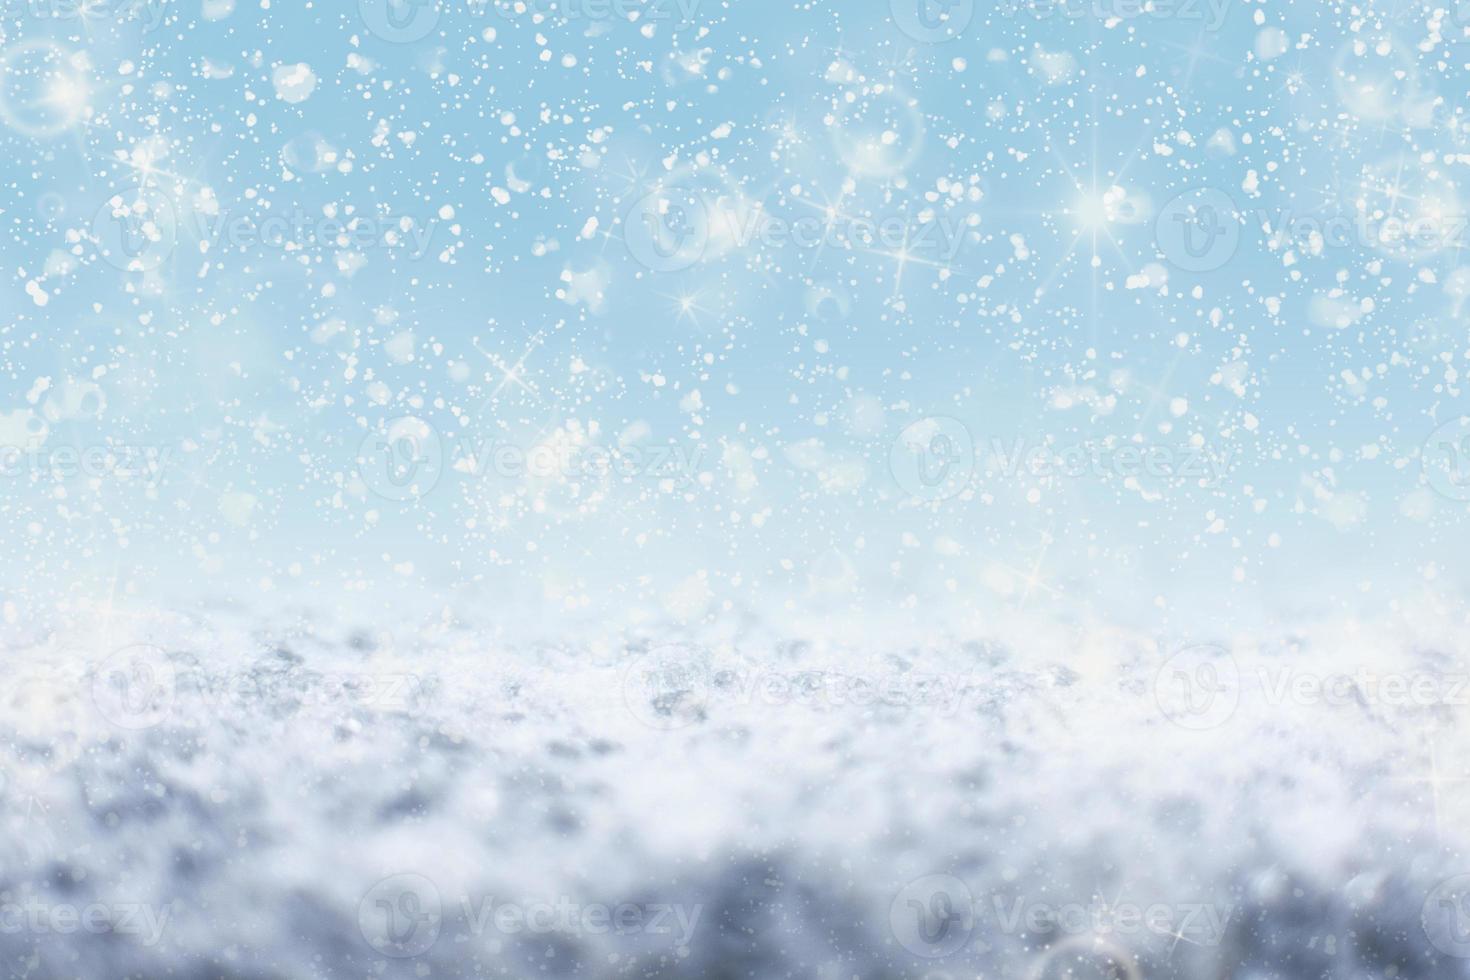 Snowing glitter on snowflake background photo